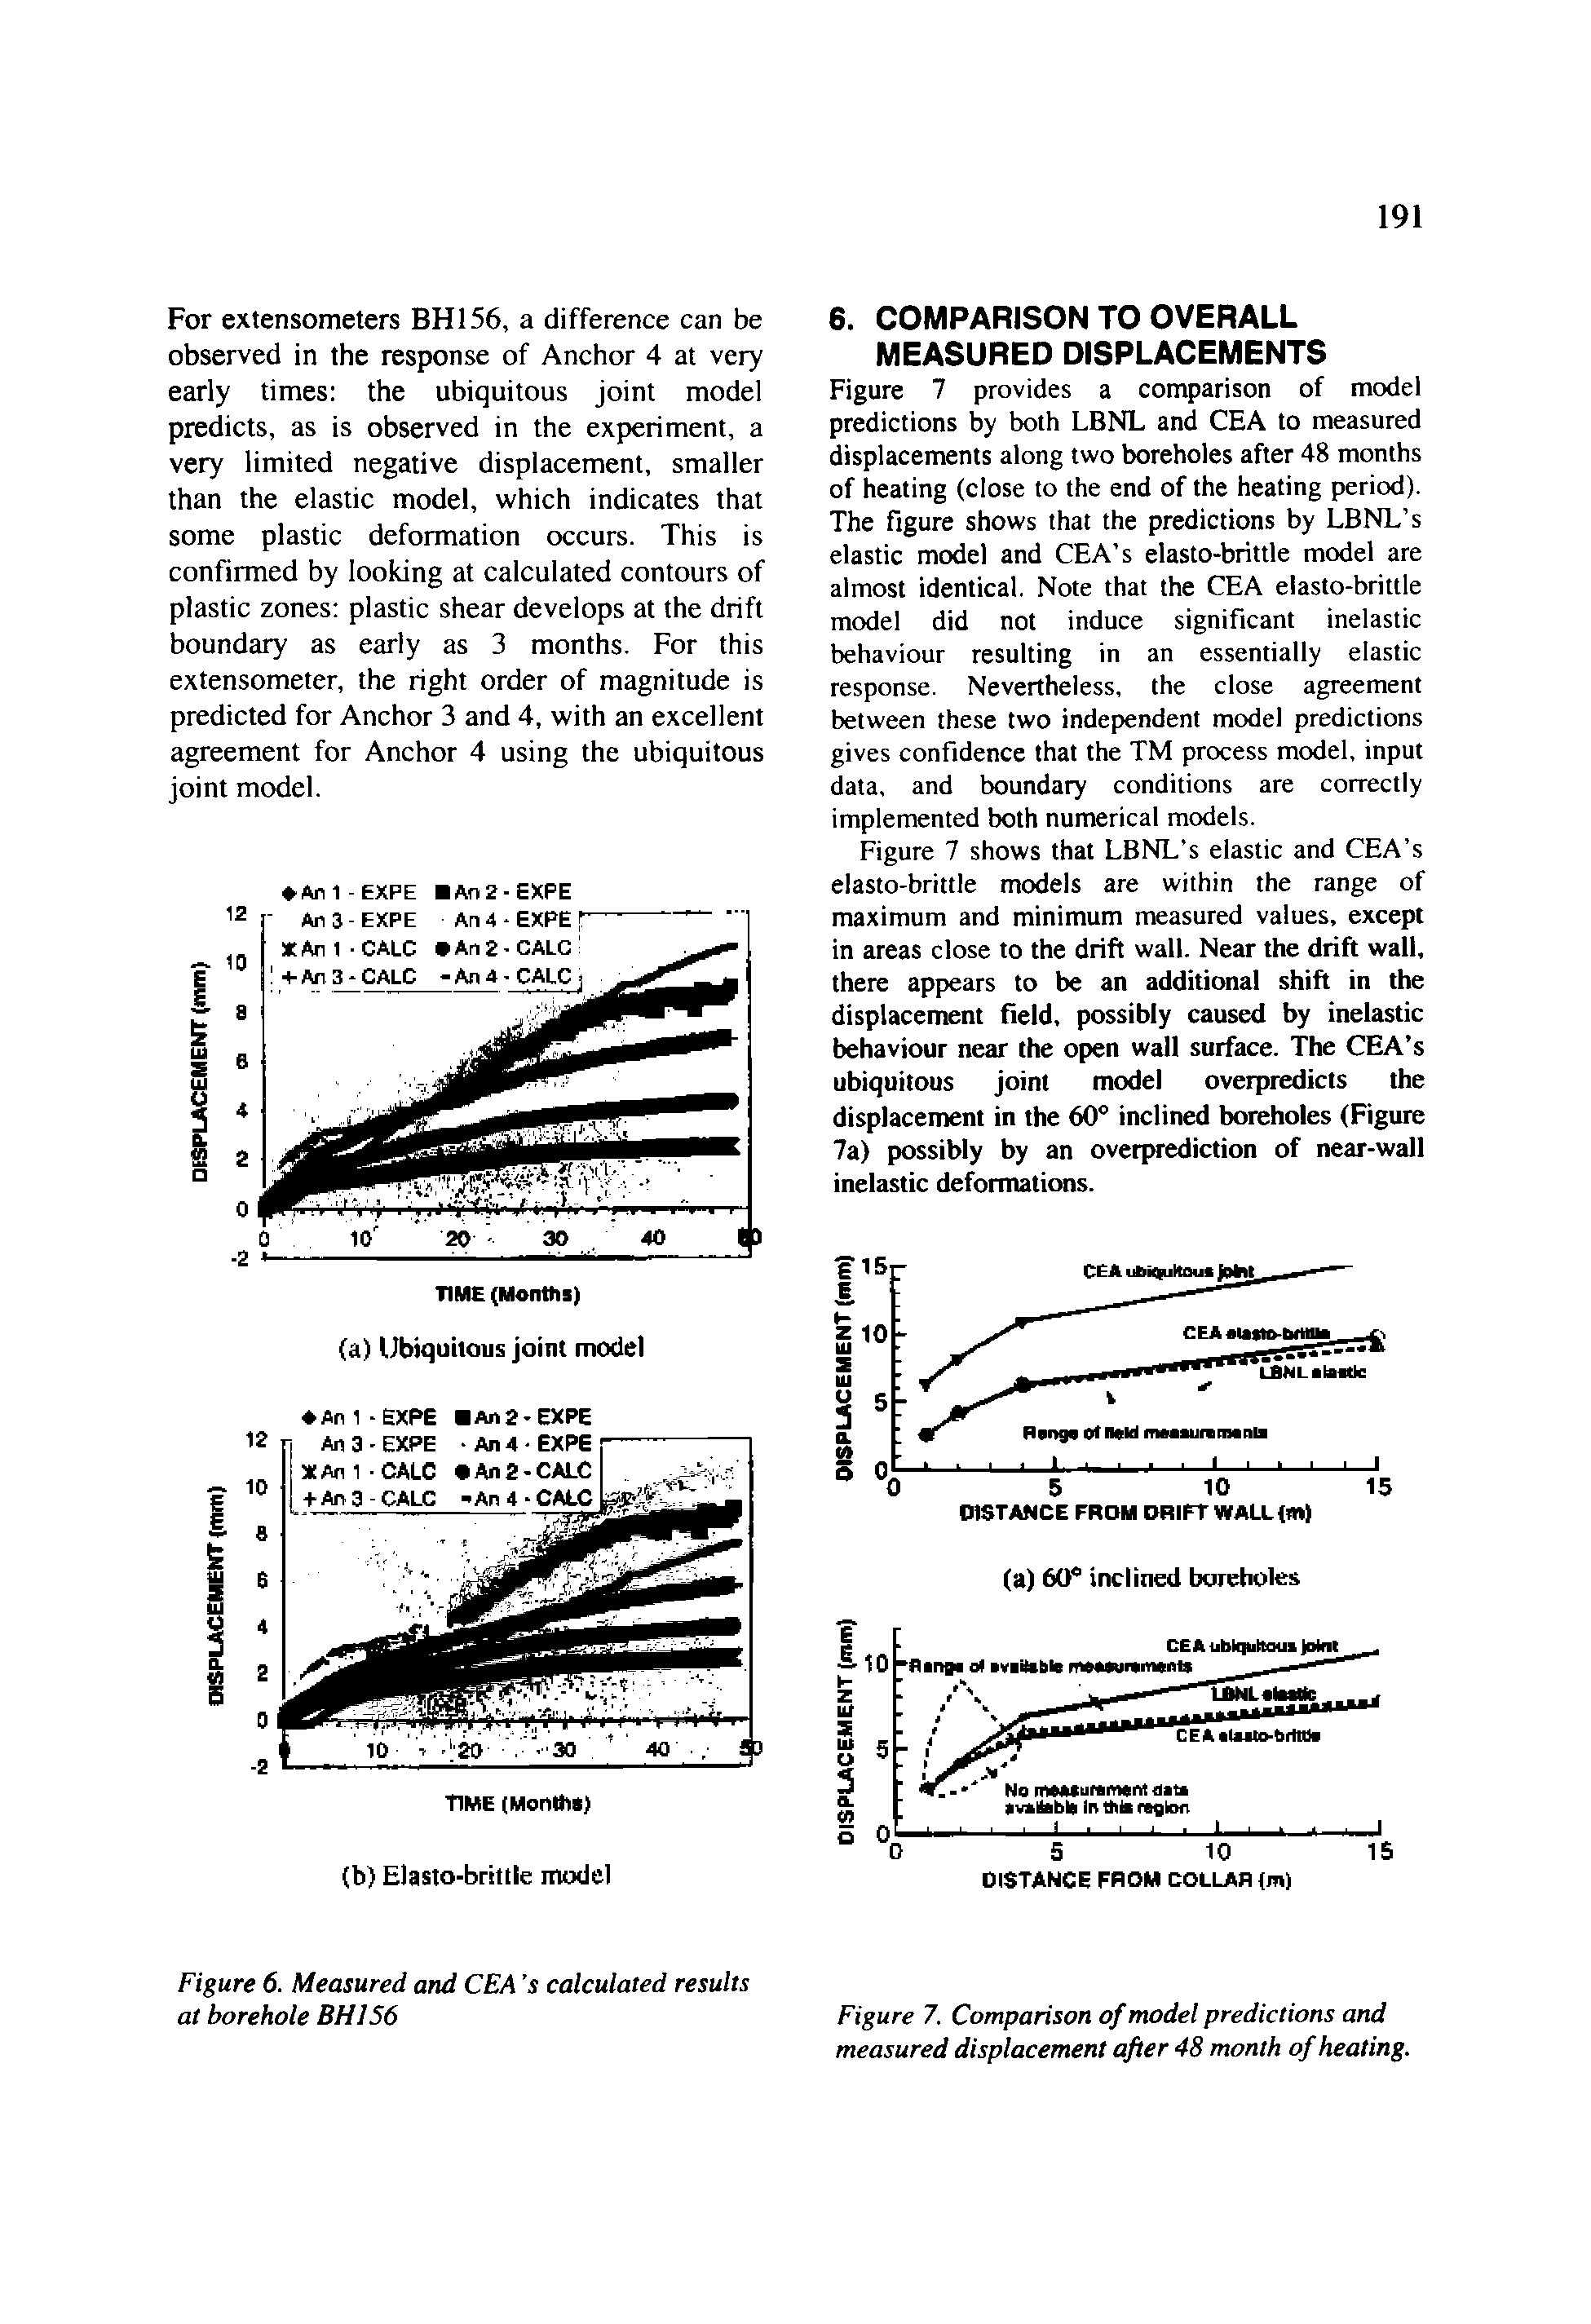 Figure 7. Comparison of model predictions and measured displacement after 48 month of heating.